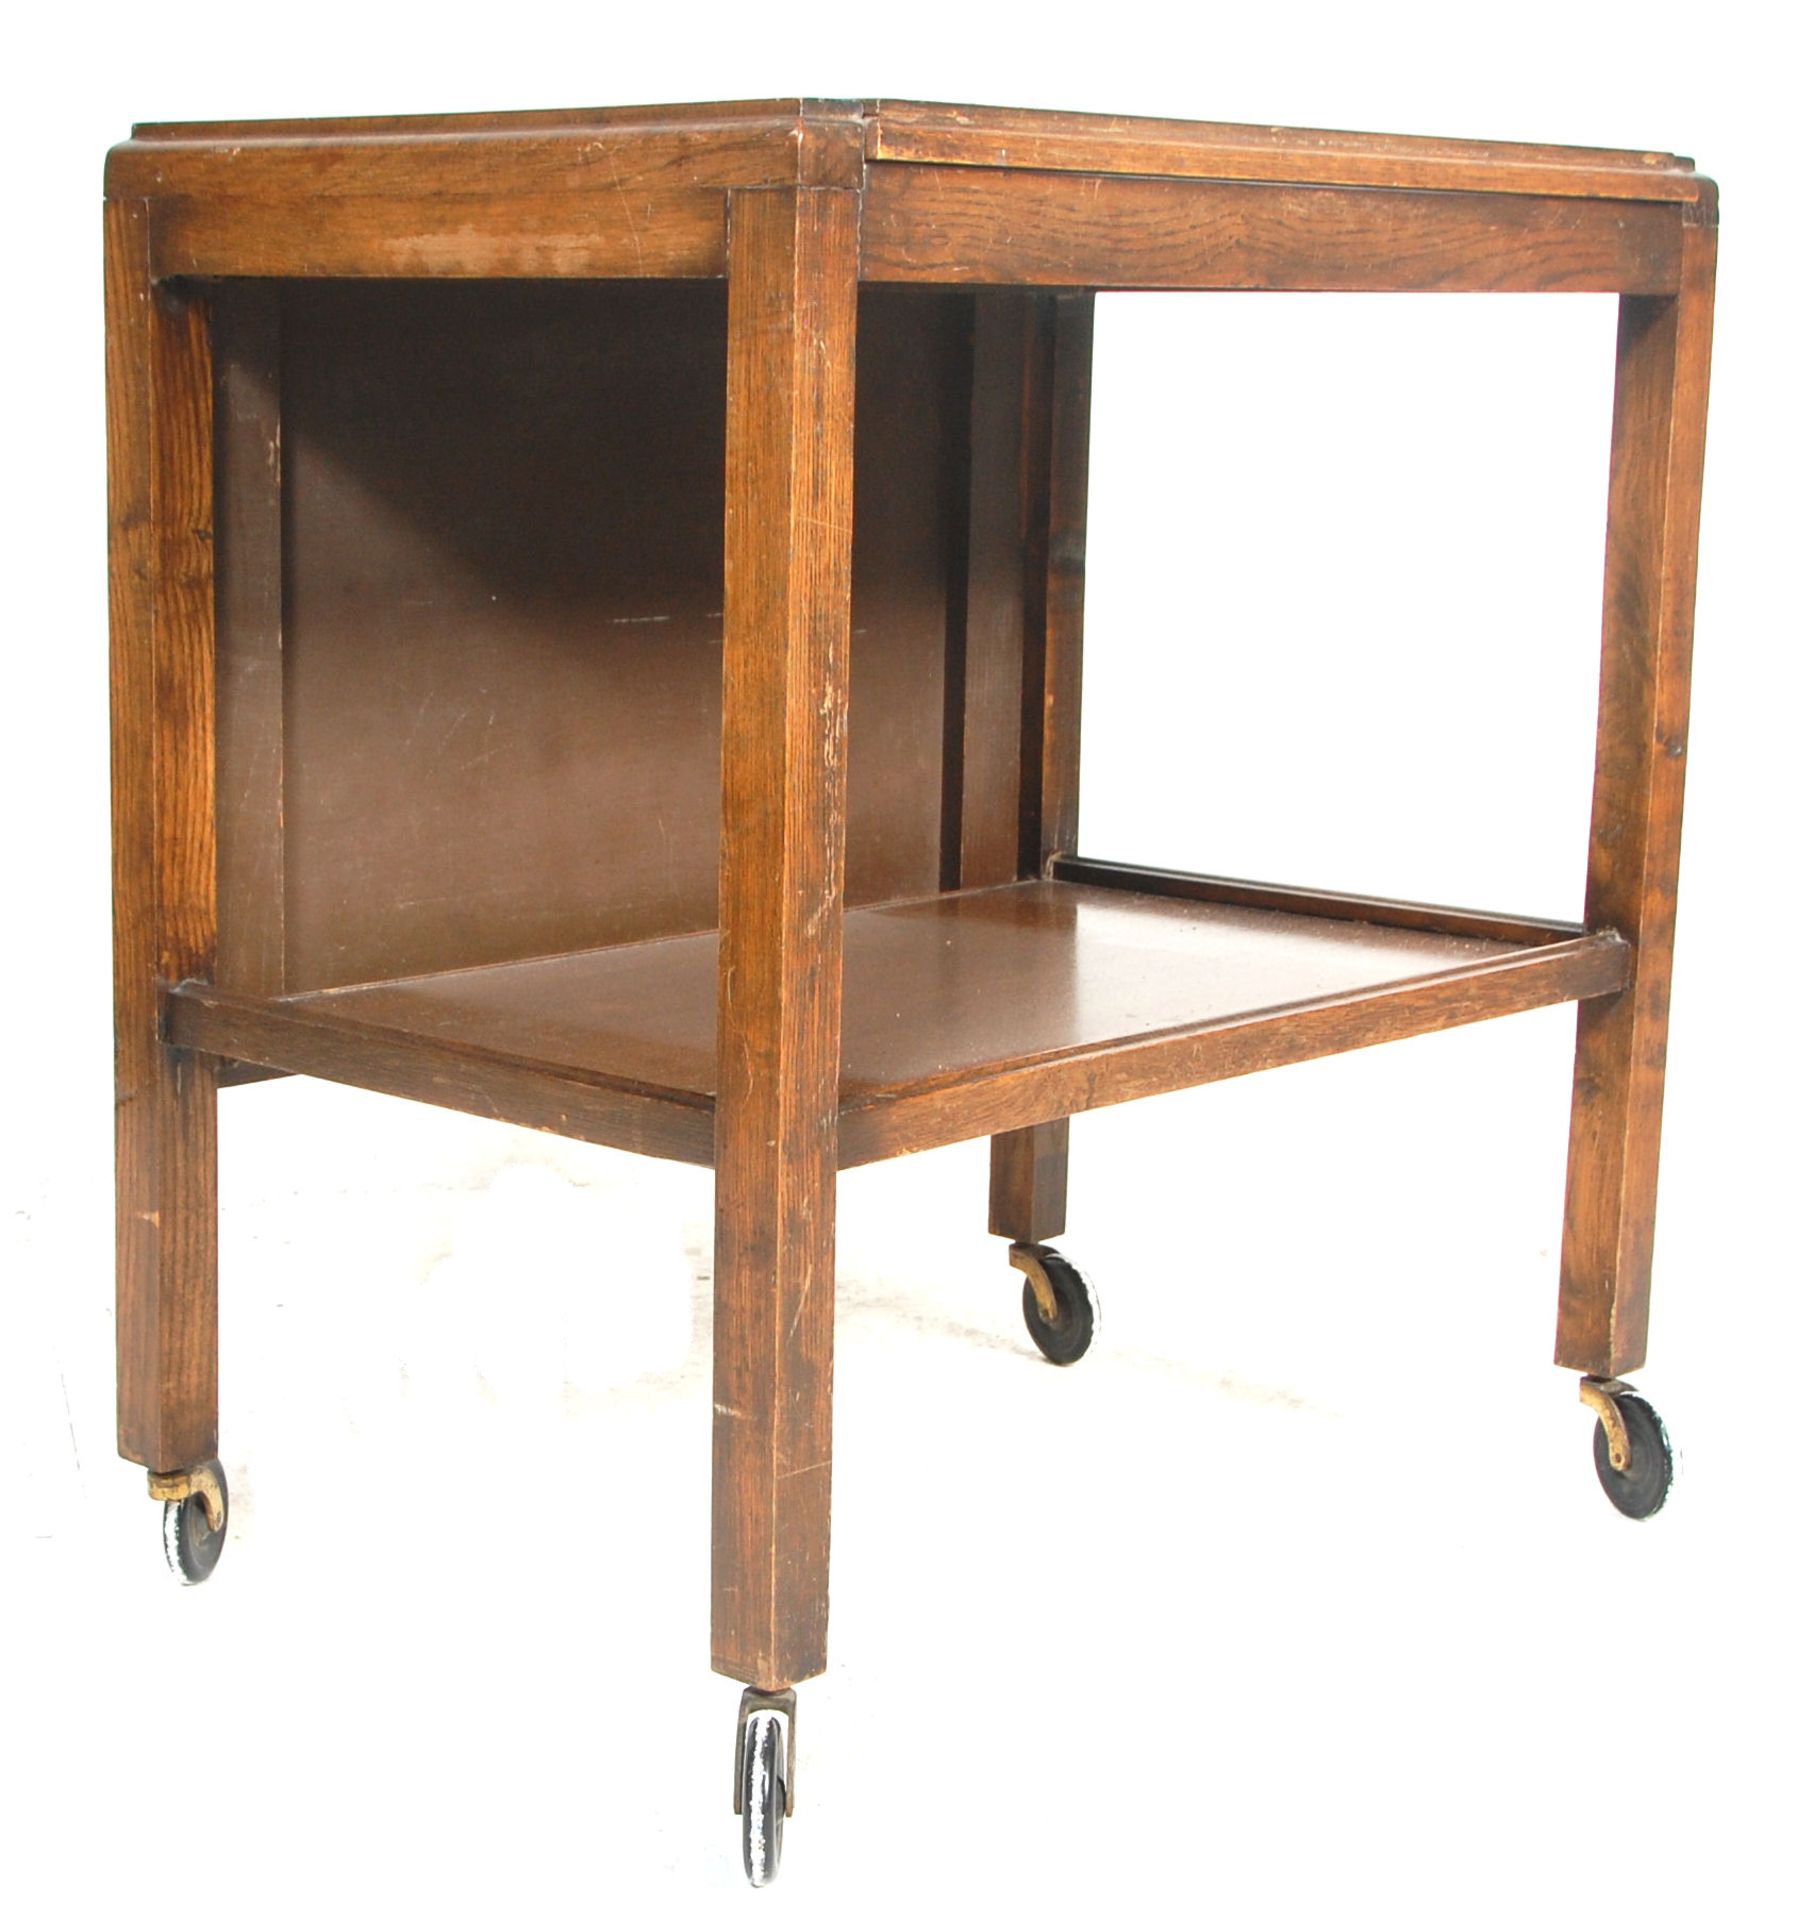 A vintage oak 1930s' butlers drinks / tea trolley having two rectangular tiers with a metamorphic